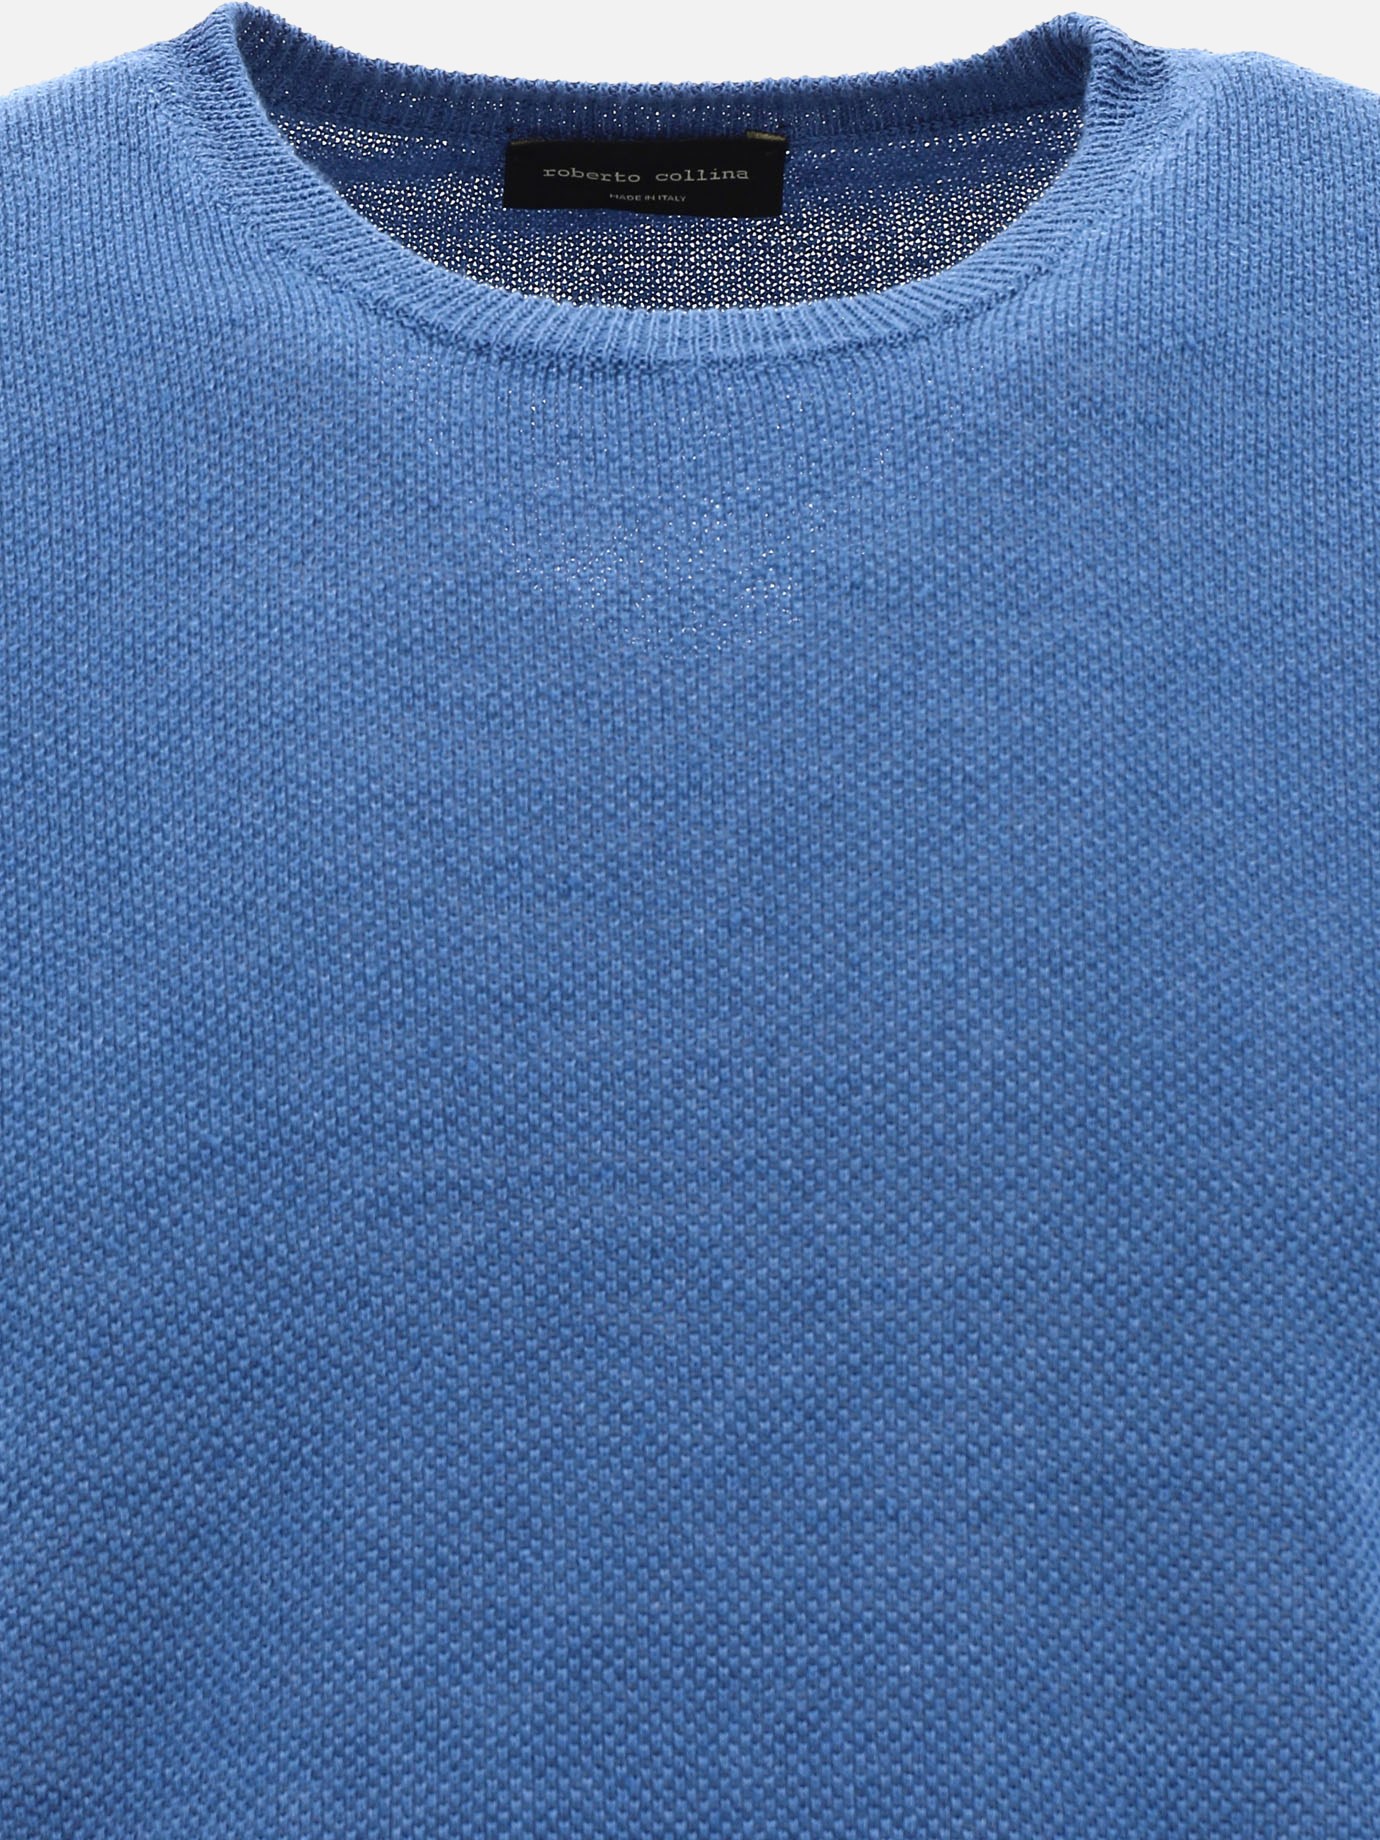 Knitted t-shirt by Roberto Collina